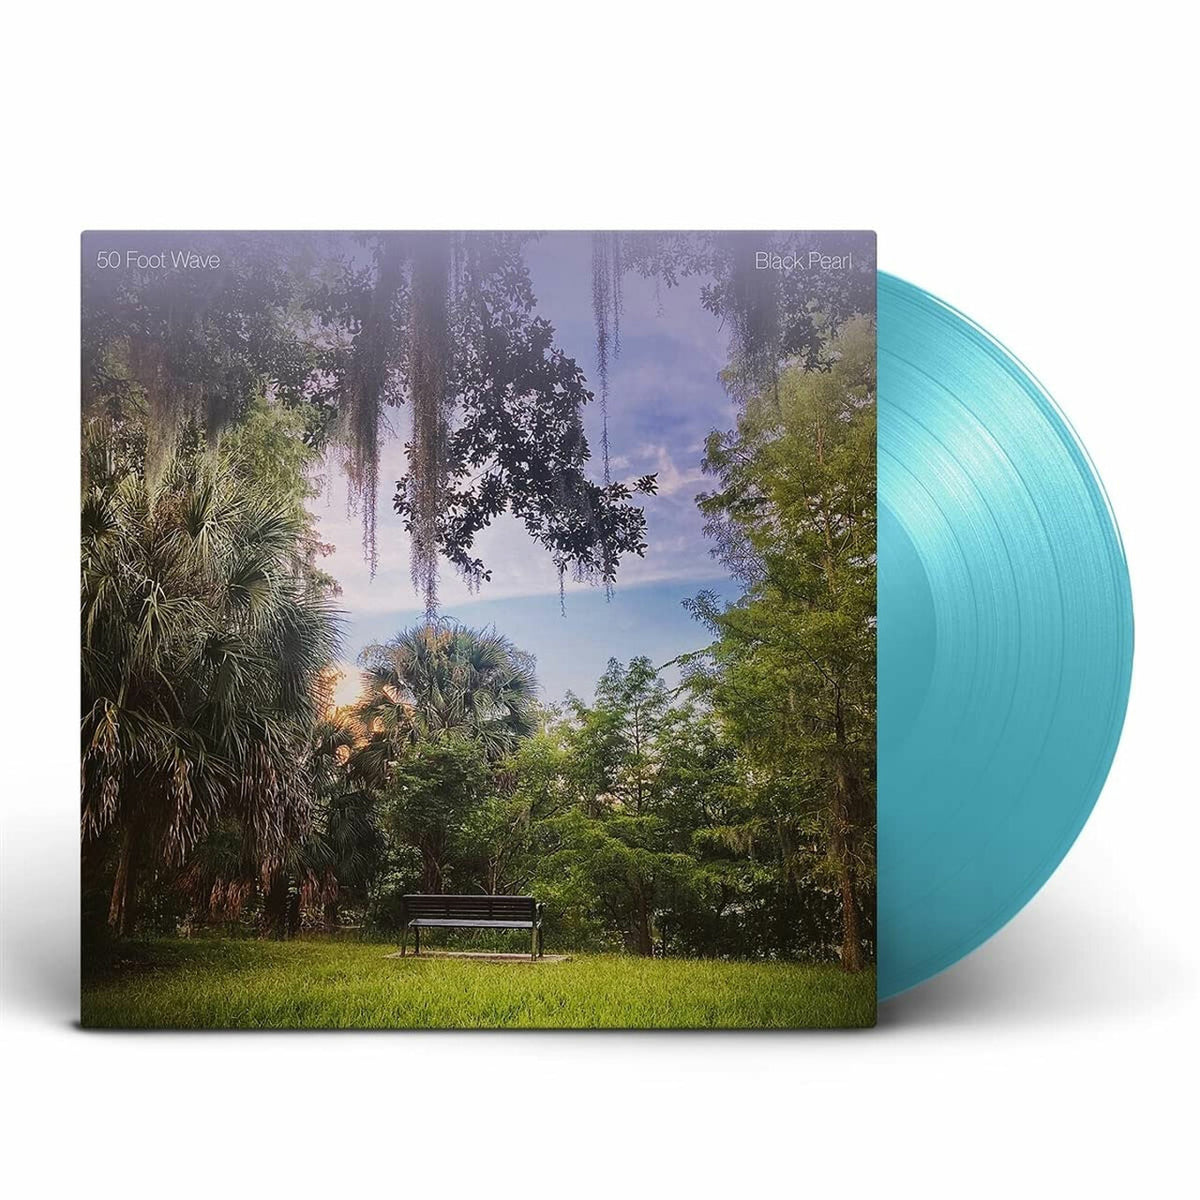 50 Foot Wave - Black Pearl LP (Limited Edition Turquoise Vinyl)